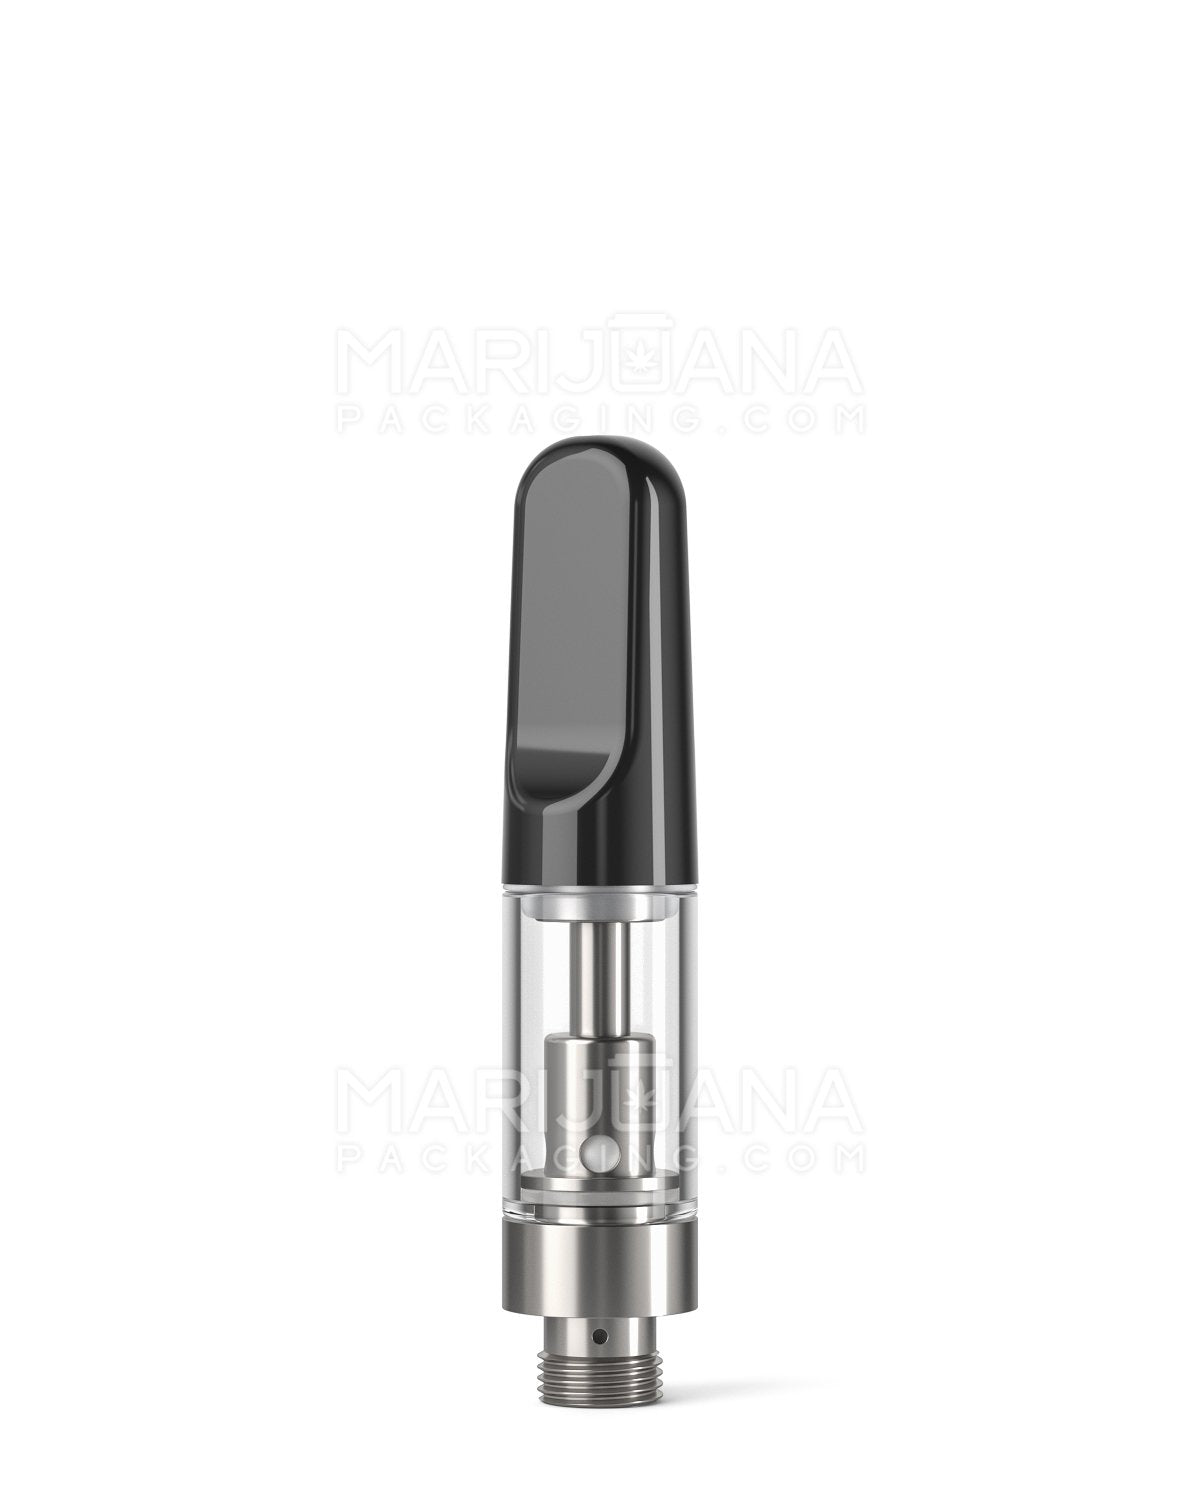 CCELL | Liquid6 Reactor Glass Cartridge with Black Ceramic Mouthpiece | 0.5mL - Screw On | Sample - 1